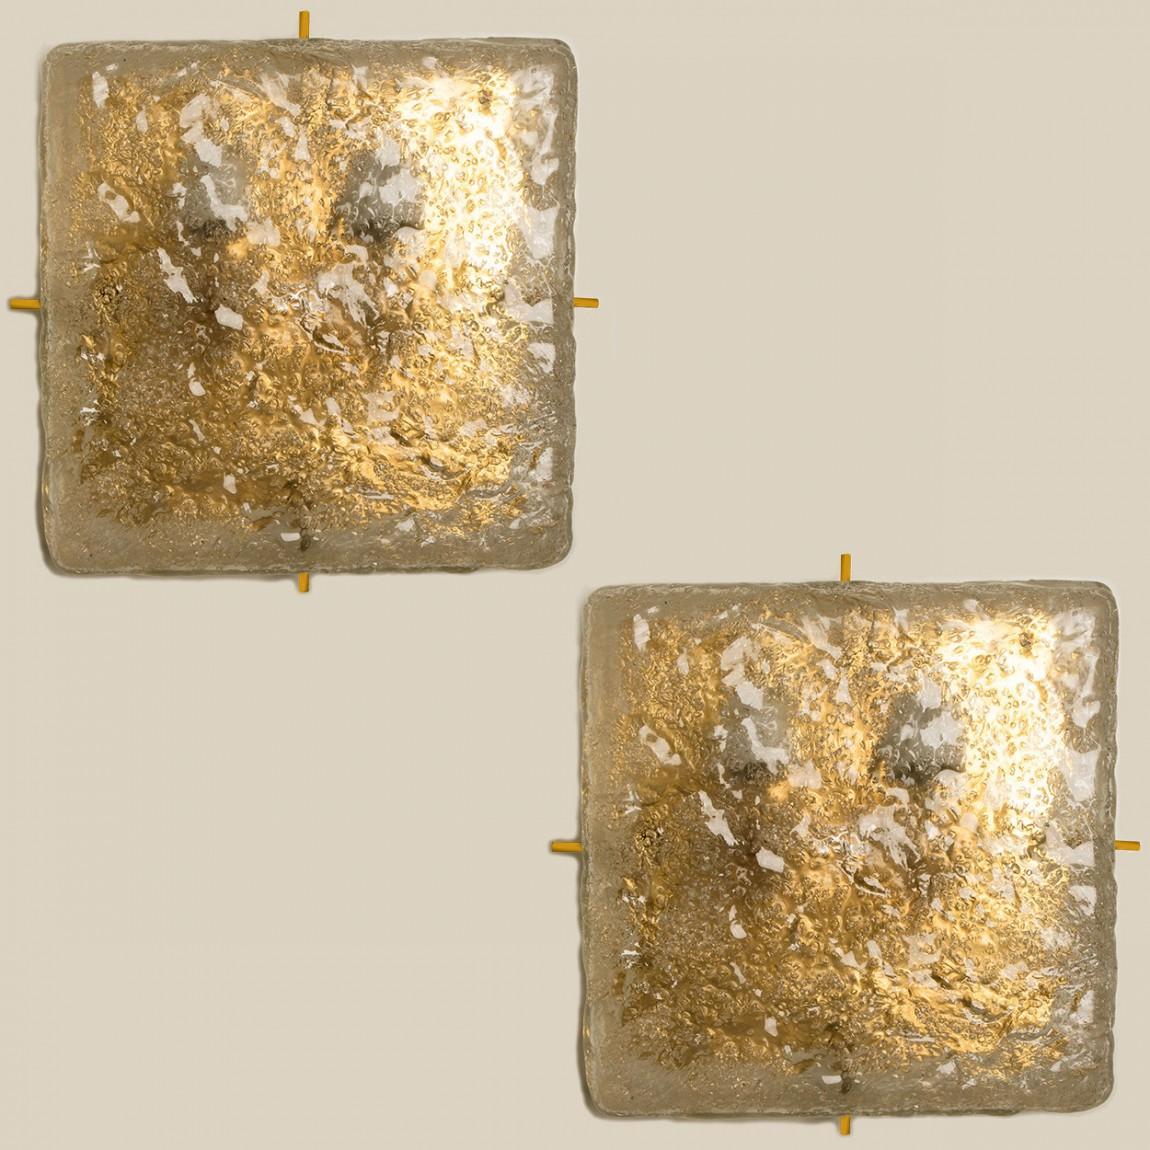 Square shaped flush mounts lights in clear glass with brass details. Manufactured by Glashütte Limburg in Germany during the 1970s.
Nice craftsmanship. Minimal and simply shaped design. The glass has small air bubbles in it, what gives a nice